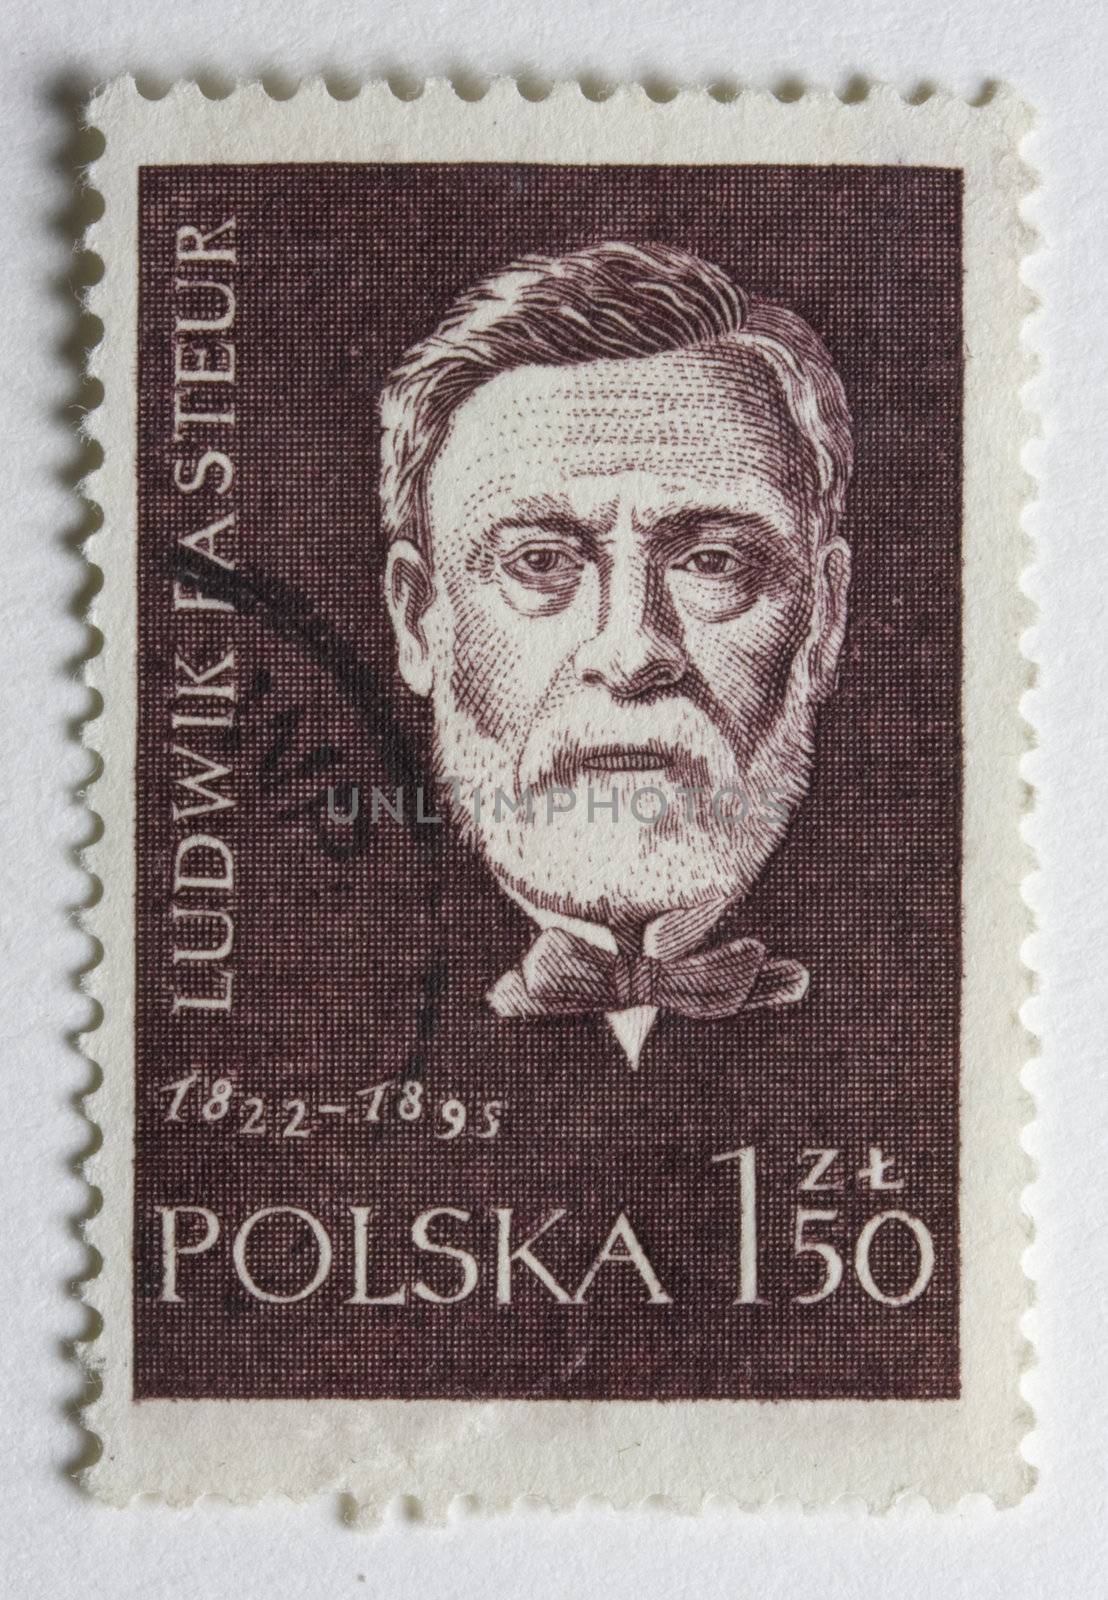 Portrait of Louis Pasteur, French chemist and microbiologist,  on a vintage post stamp from Poland